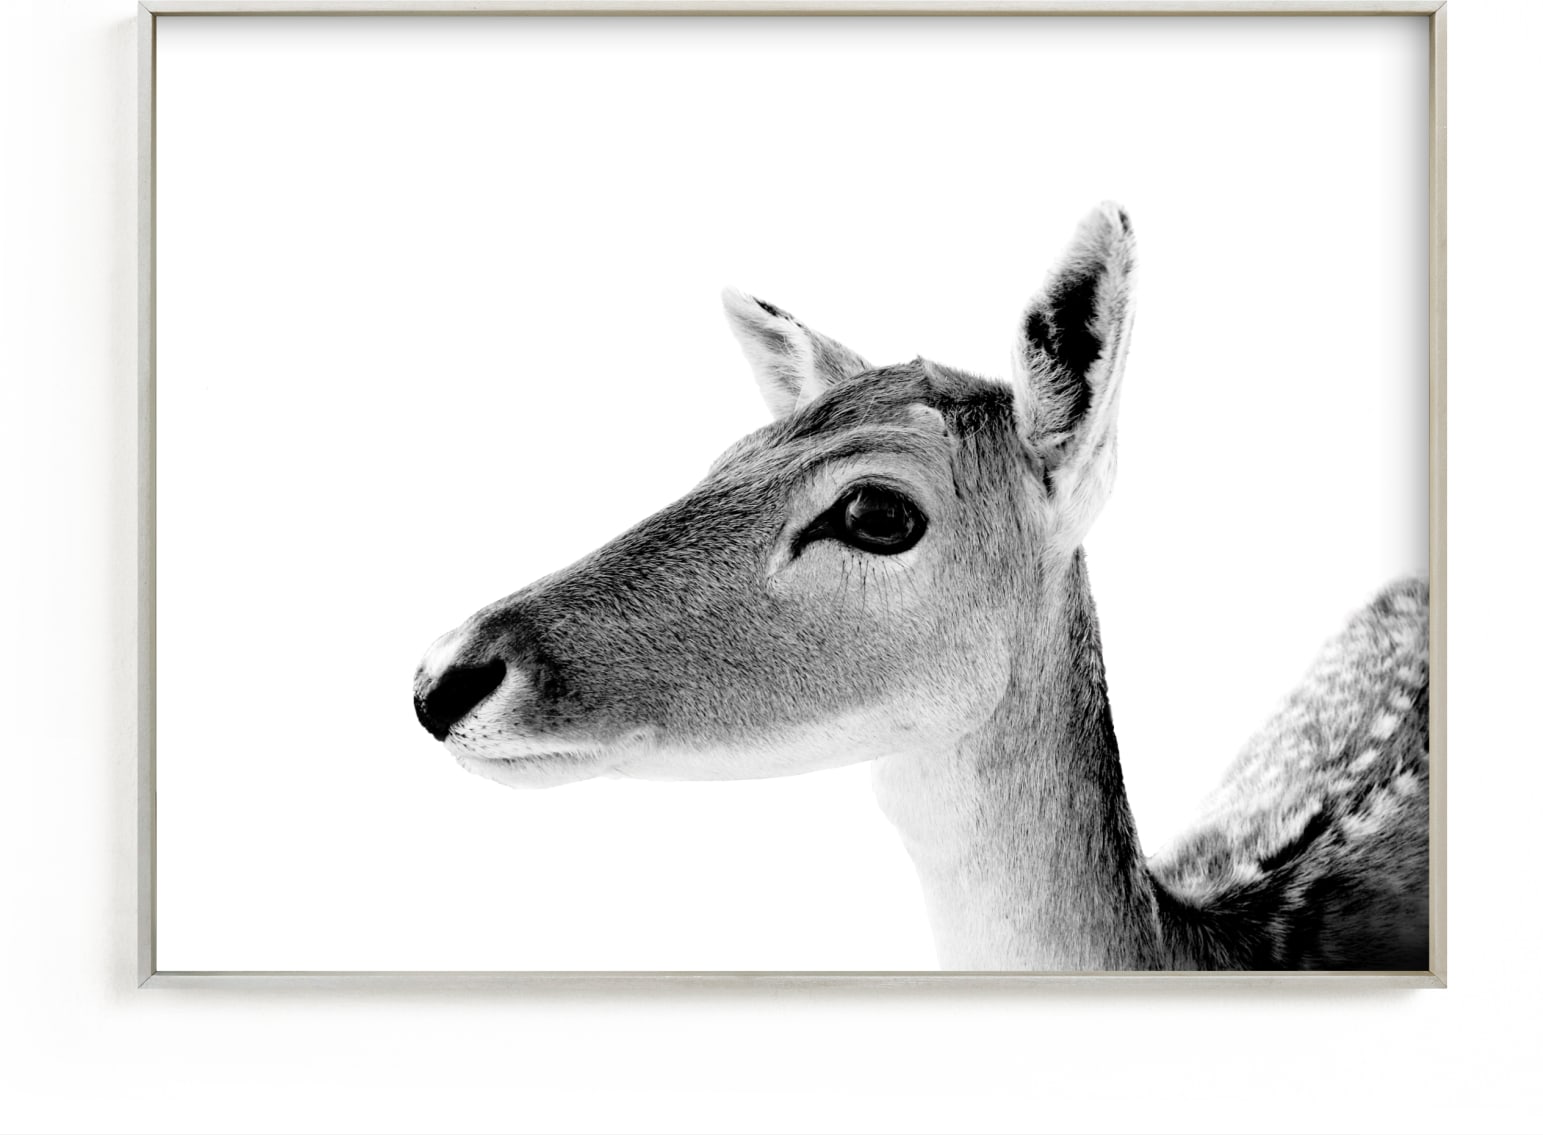 This is a black and white art by Jessie Steury called Darling Deer.